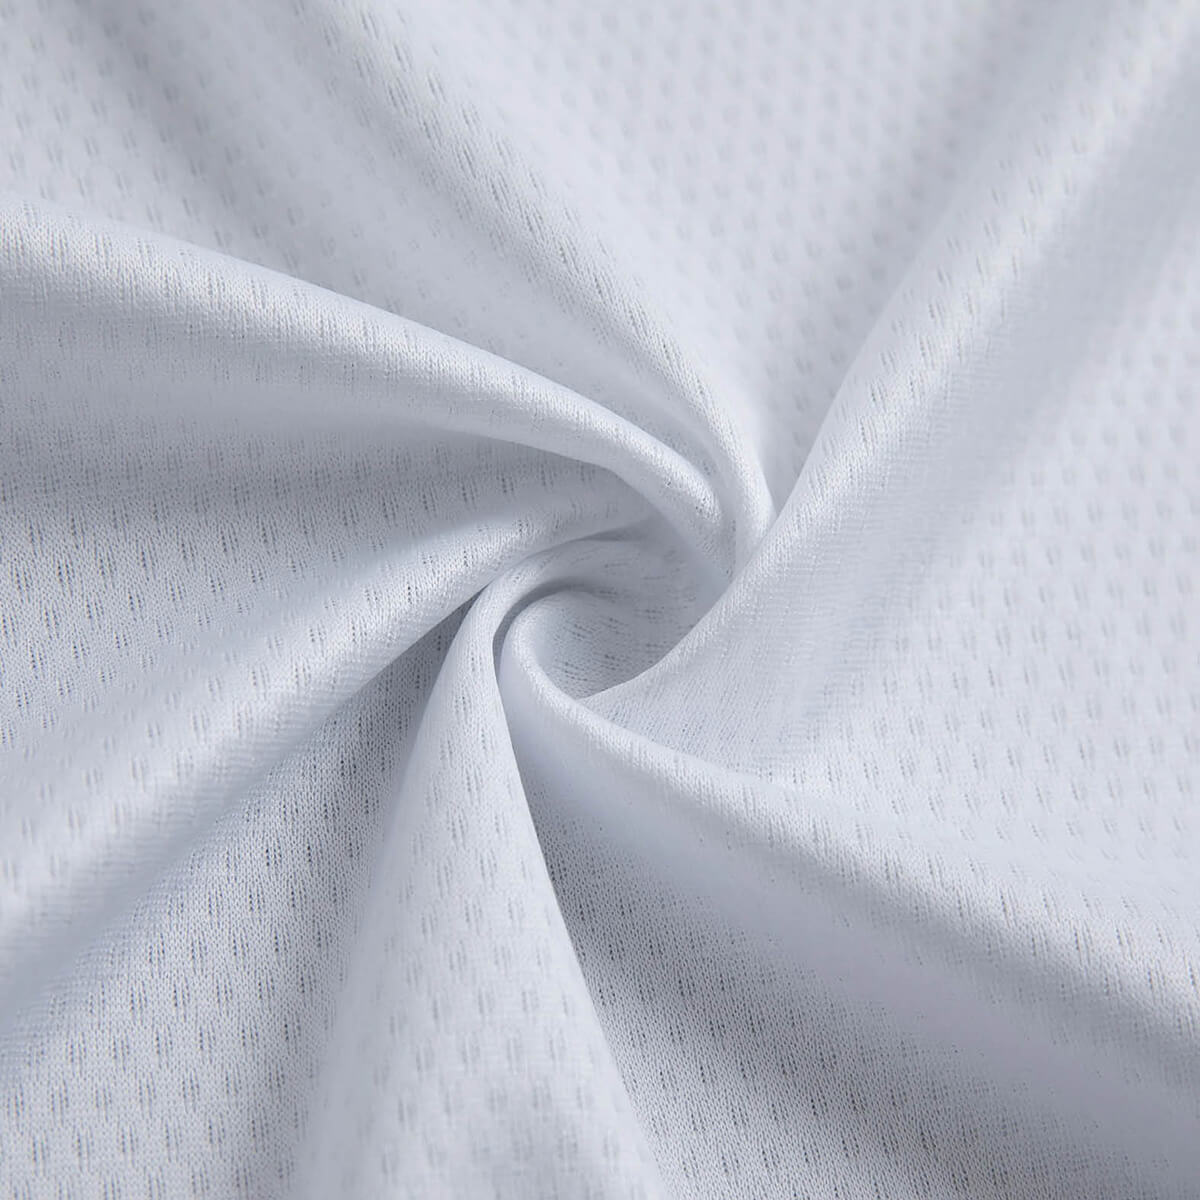 Moisture-wicking fabric for comfort during cycling